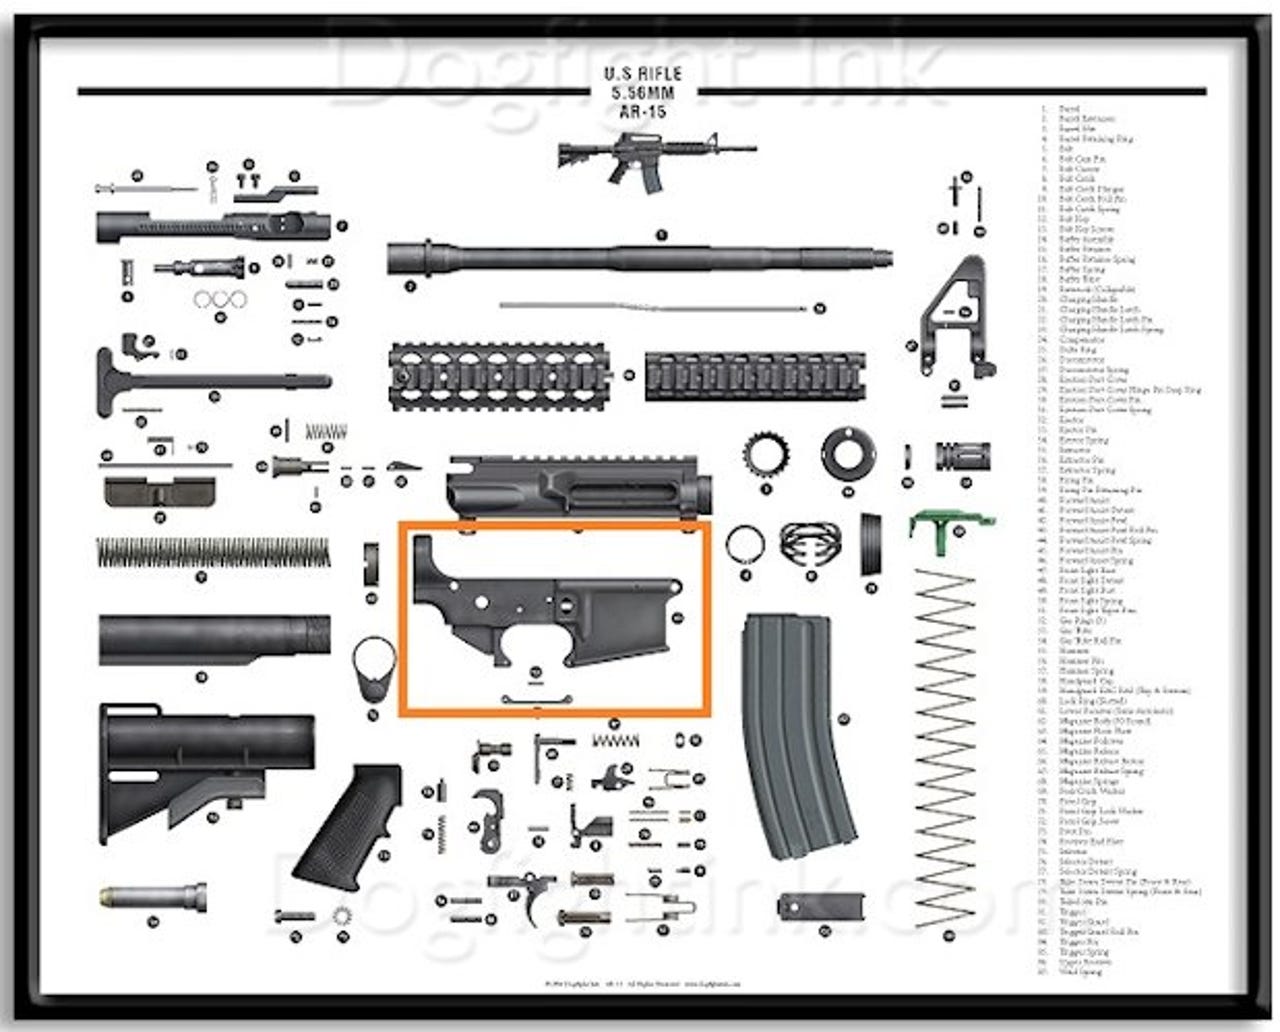 The printed part is just one of more than 70 parts needed to build a gun